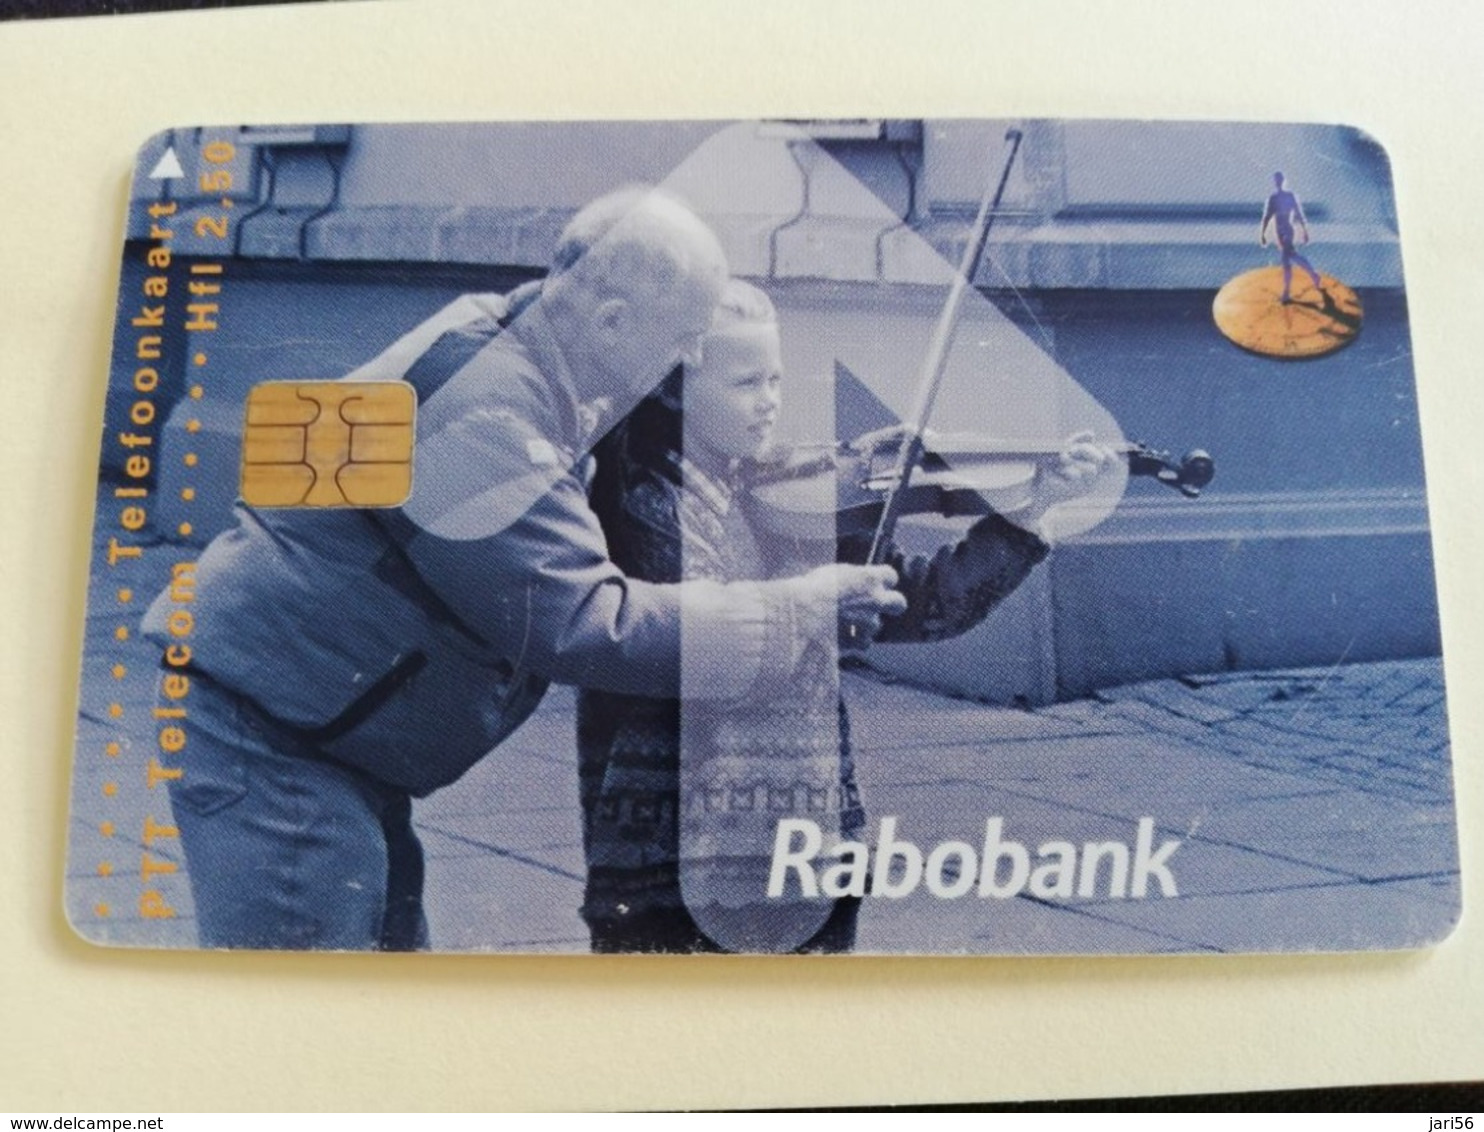 NETHERLANDS  ADVERTISING CHIPCARD HFL 2,50   CRD 378.04   RABOBANK  VIOOL            Fine Used   ** 3214** - Private